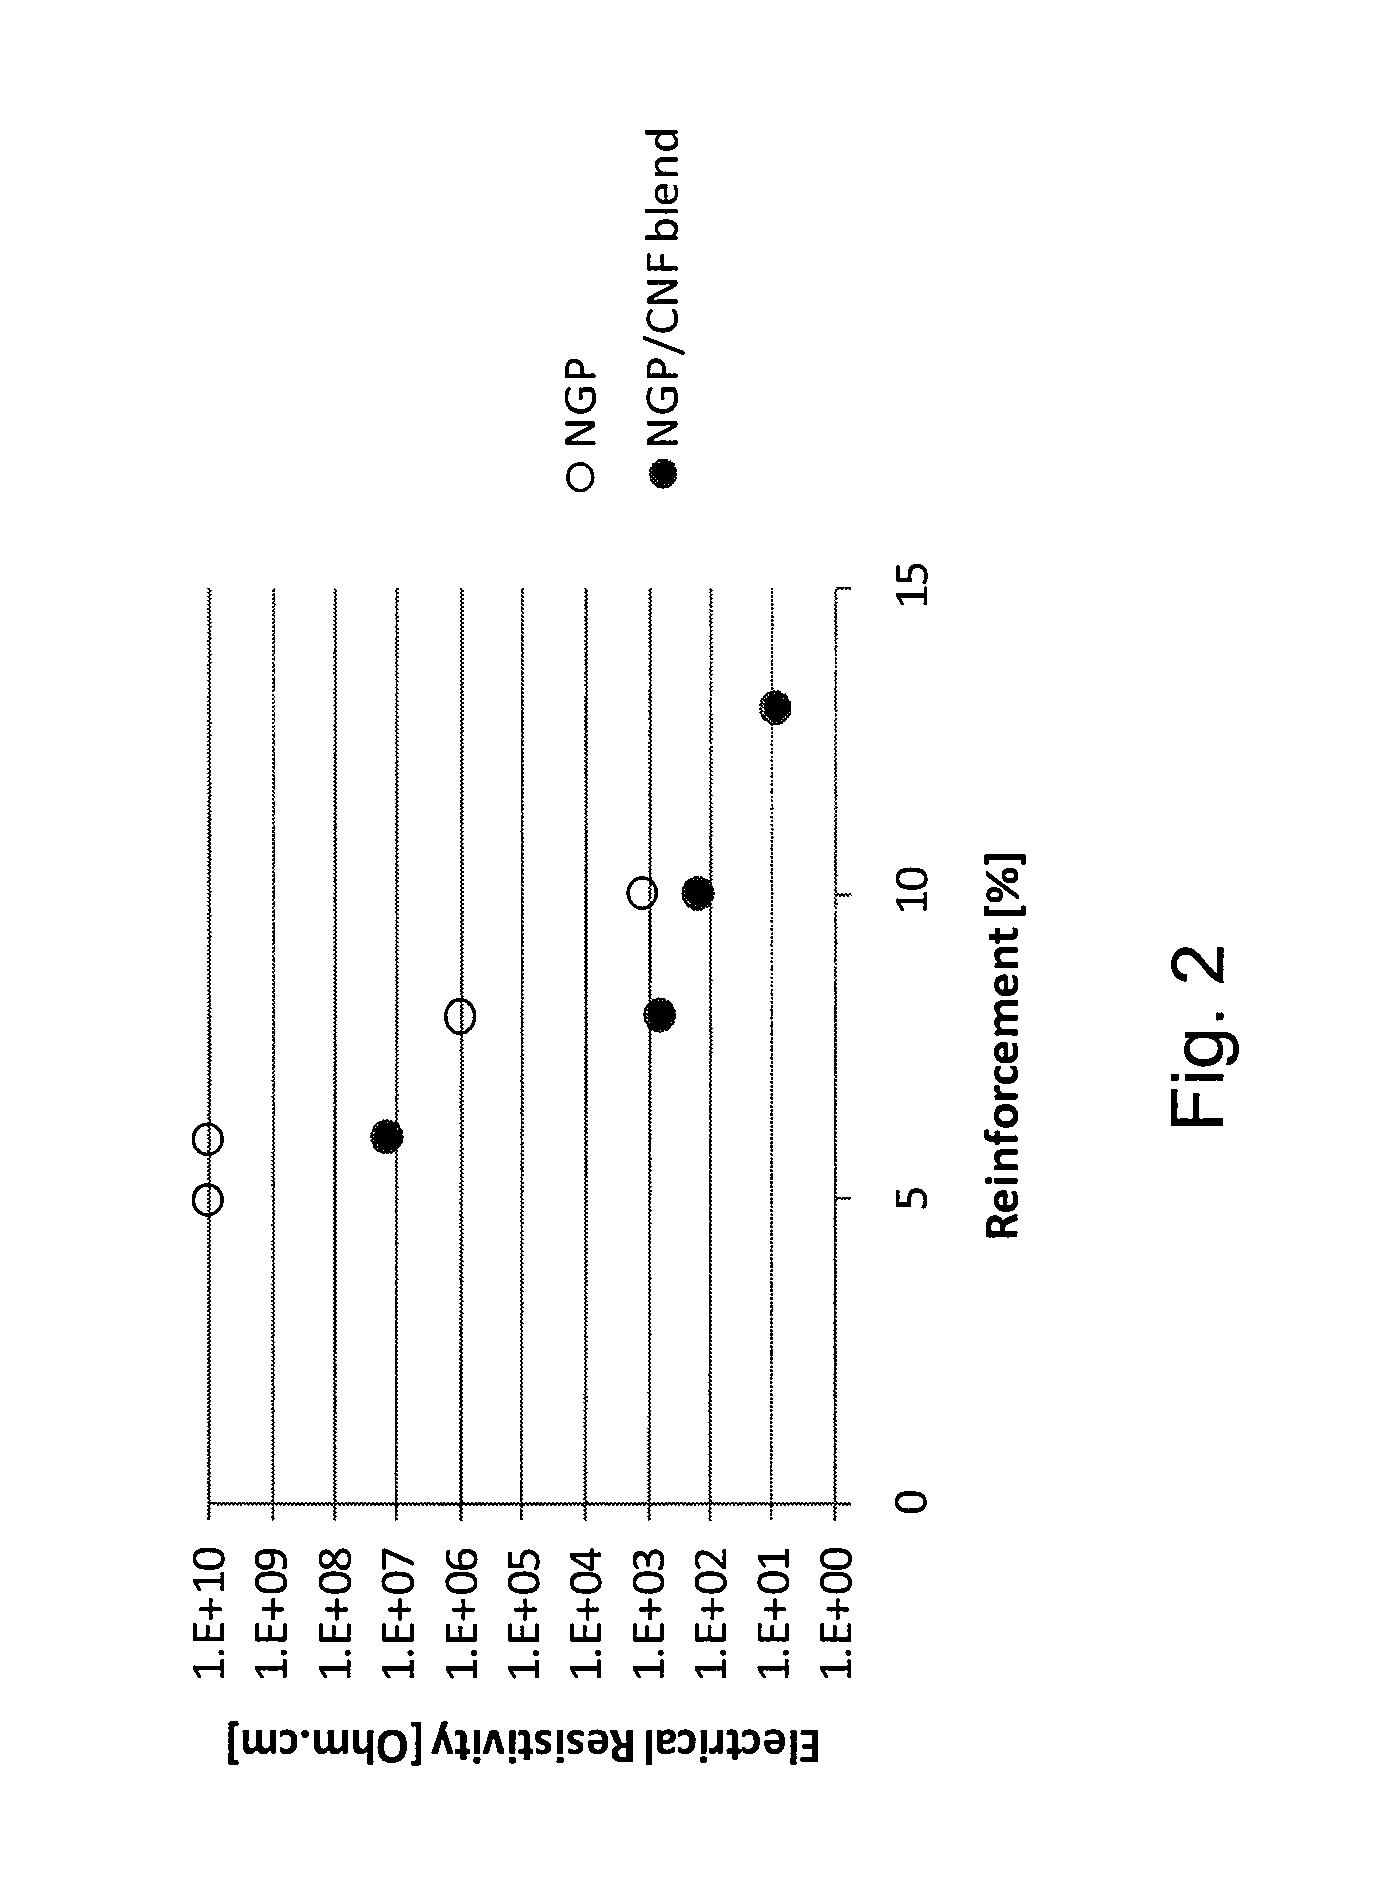 Nanocarbon-reinforced polymer composite and method of making